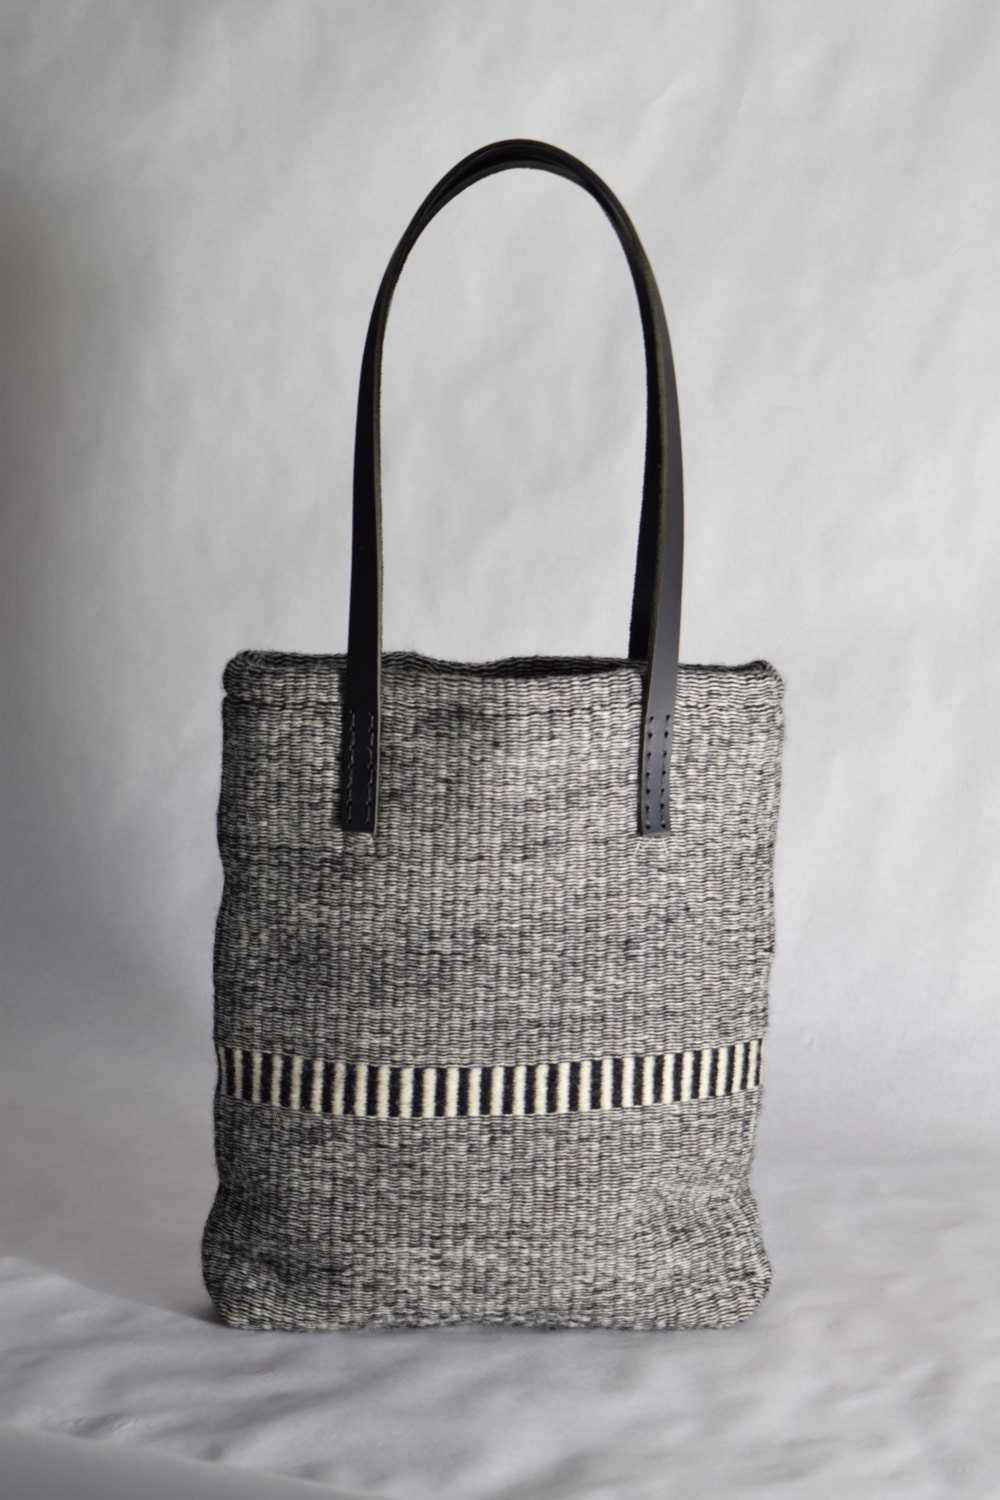 Hand woven black and white striped tote bag black leather wool weaving textile purse